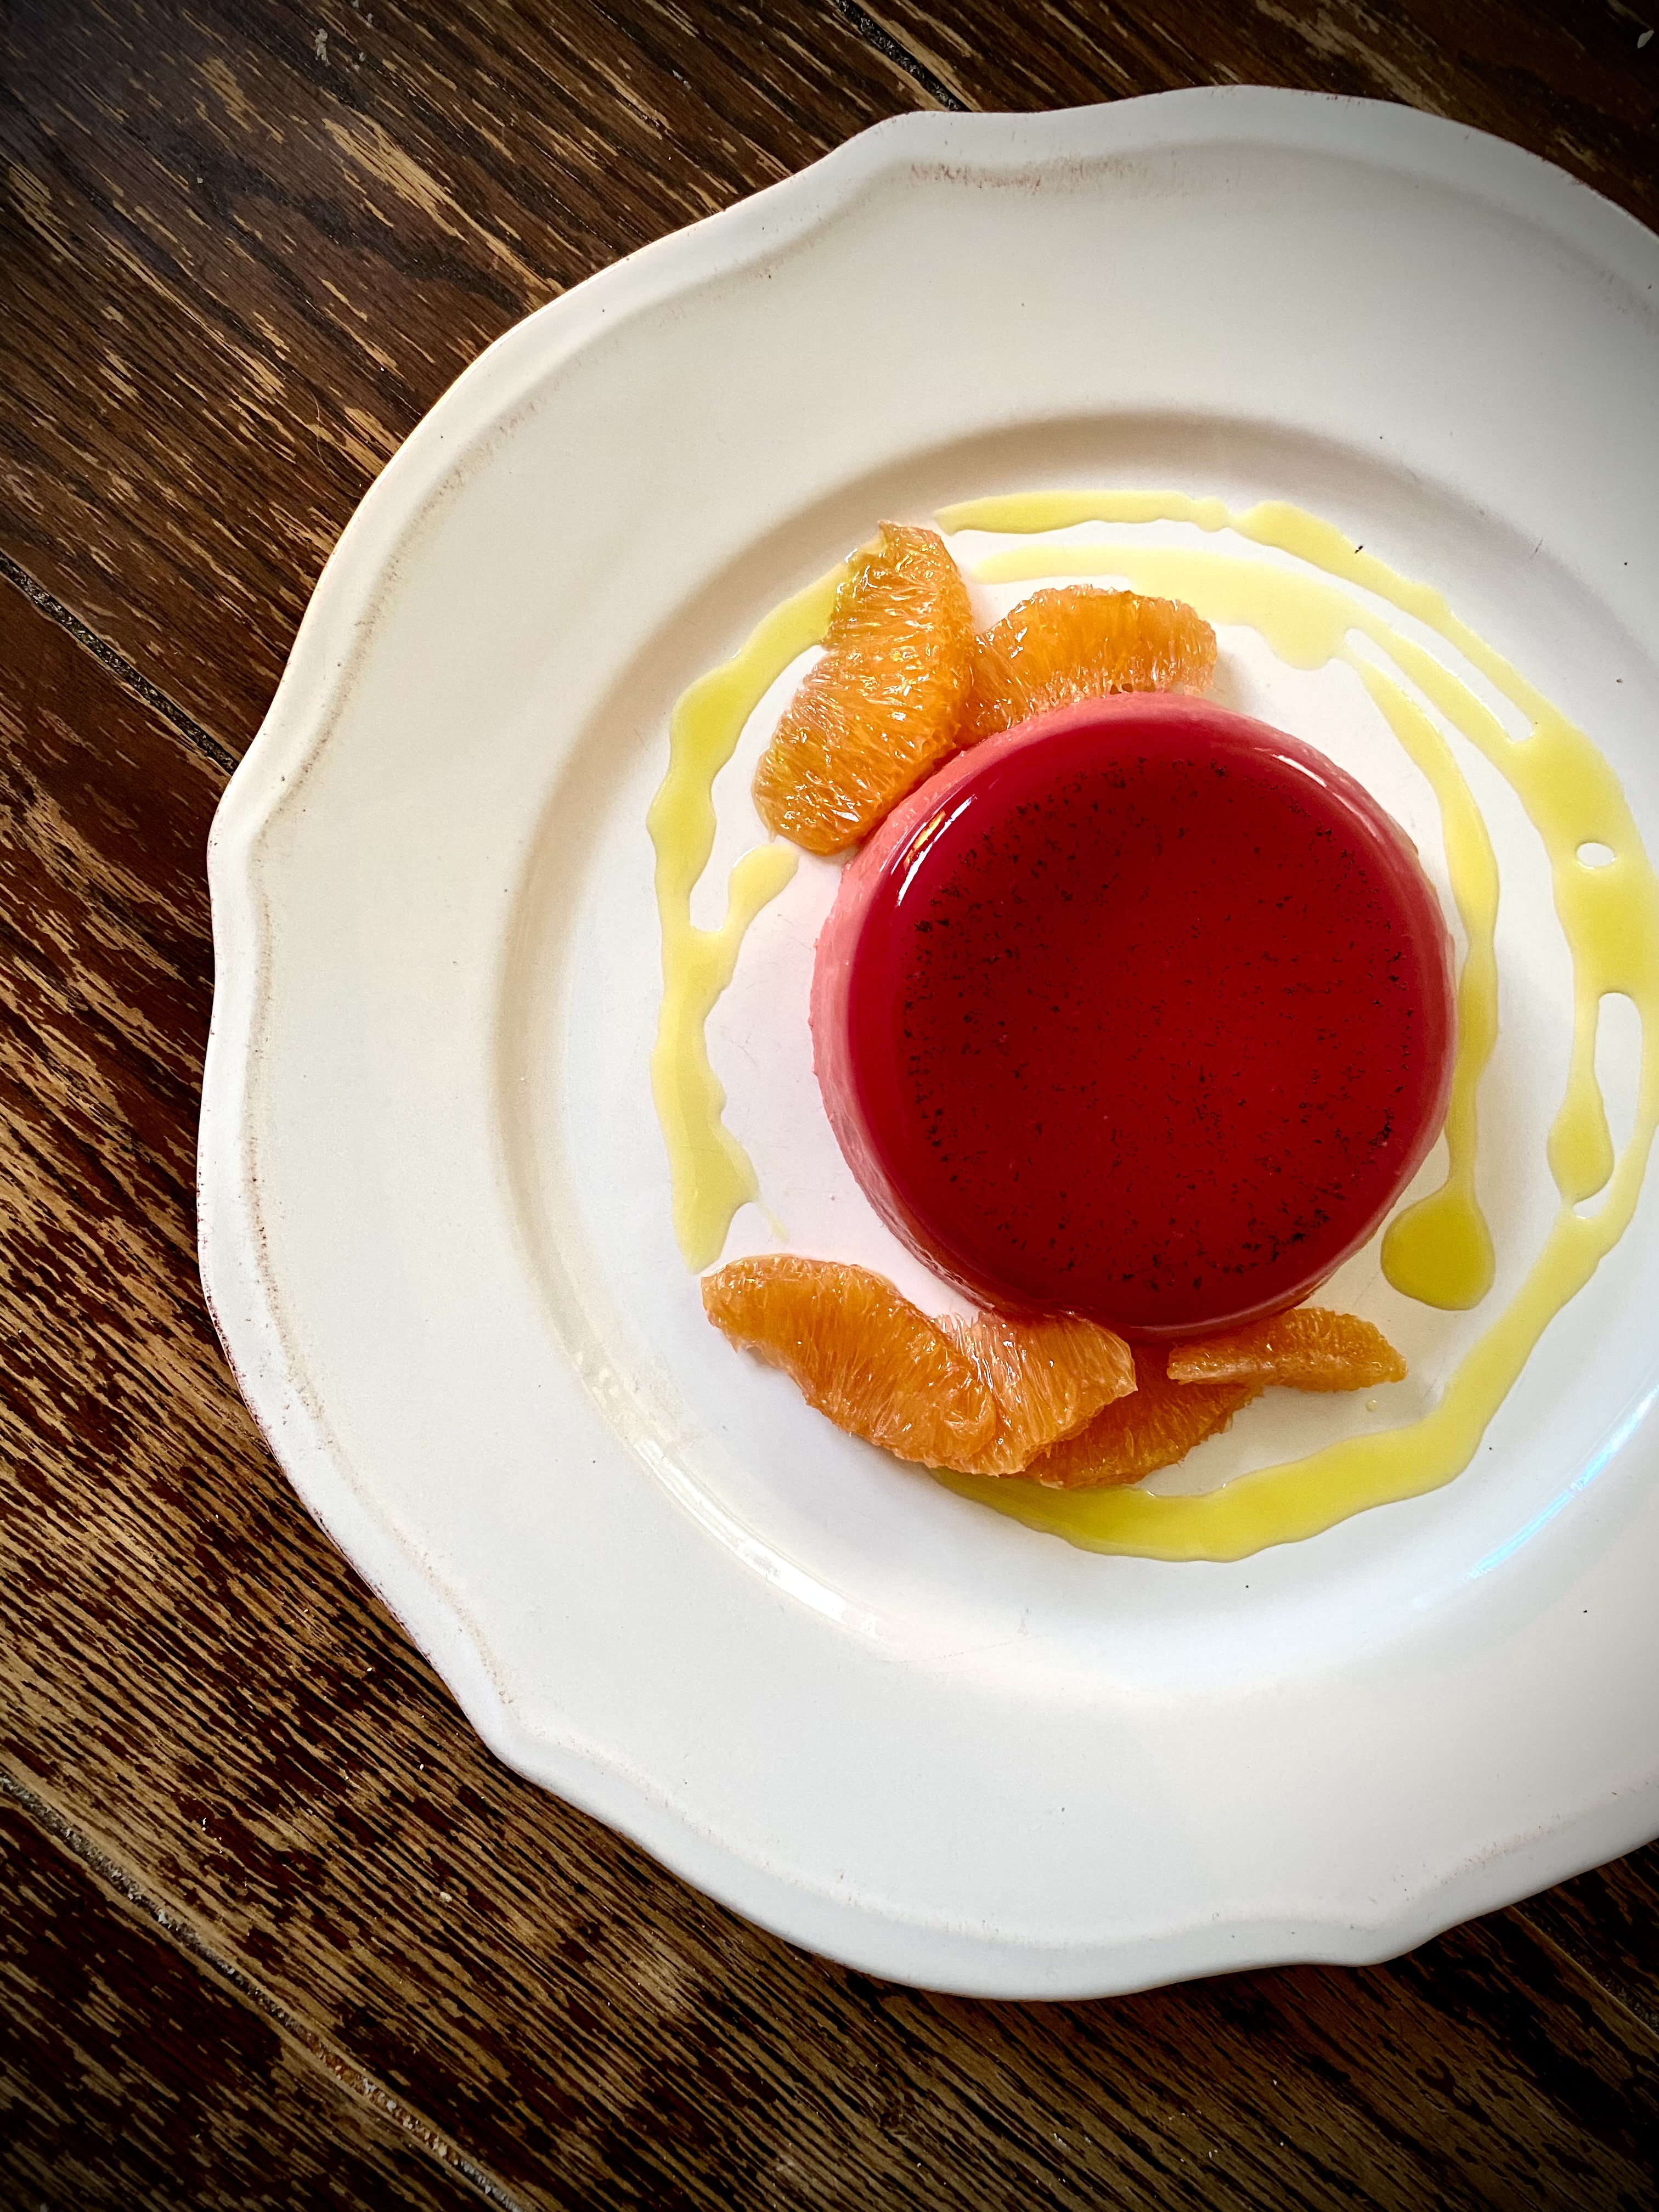 Beet, buttermilk and maple lavender panna cotta on a white plate